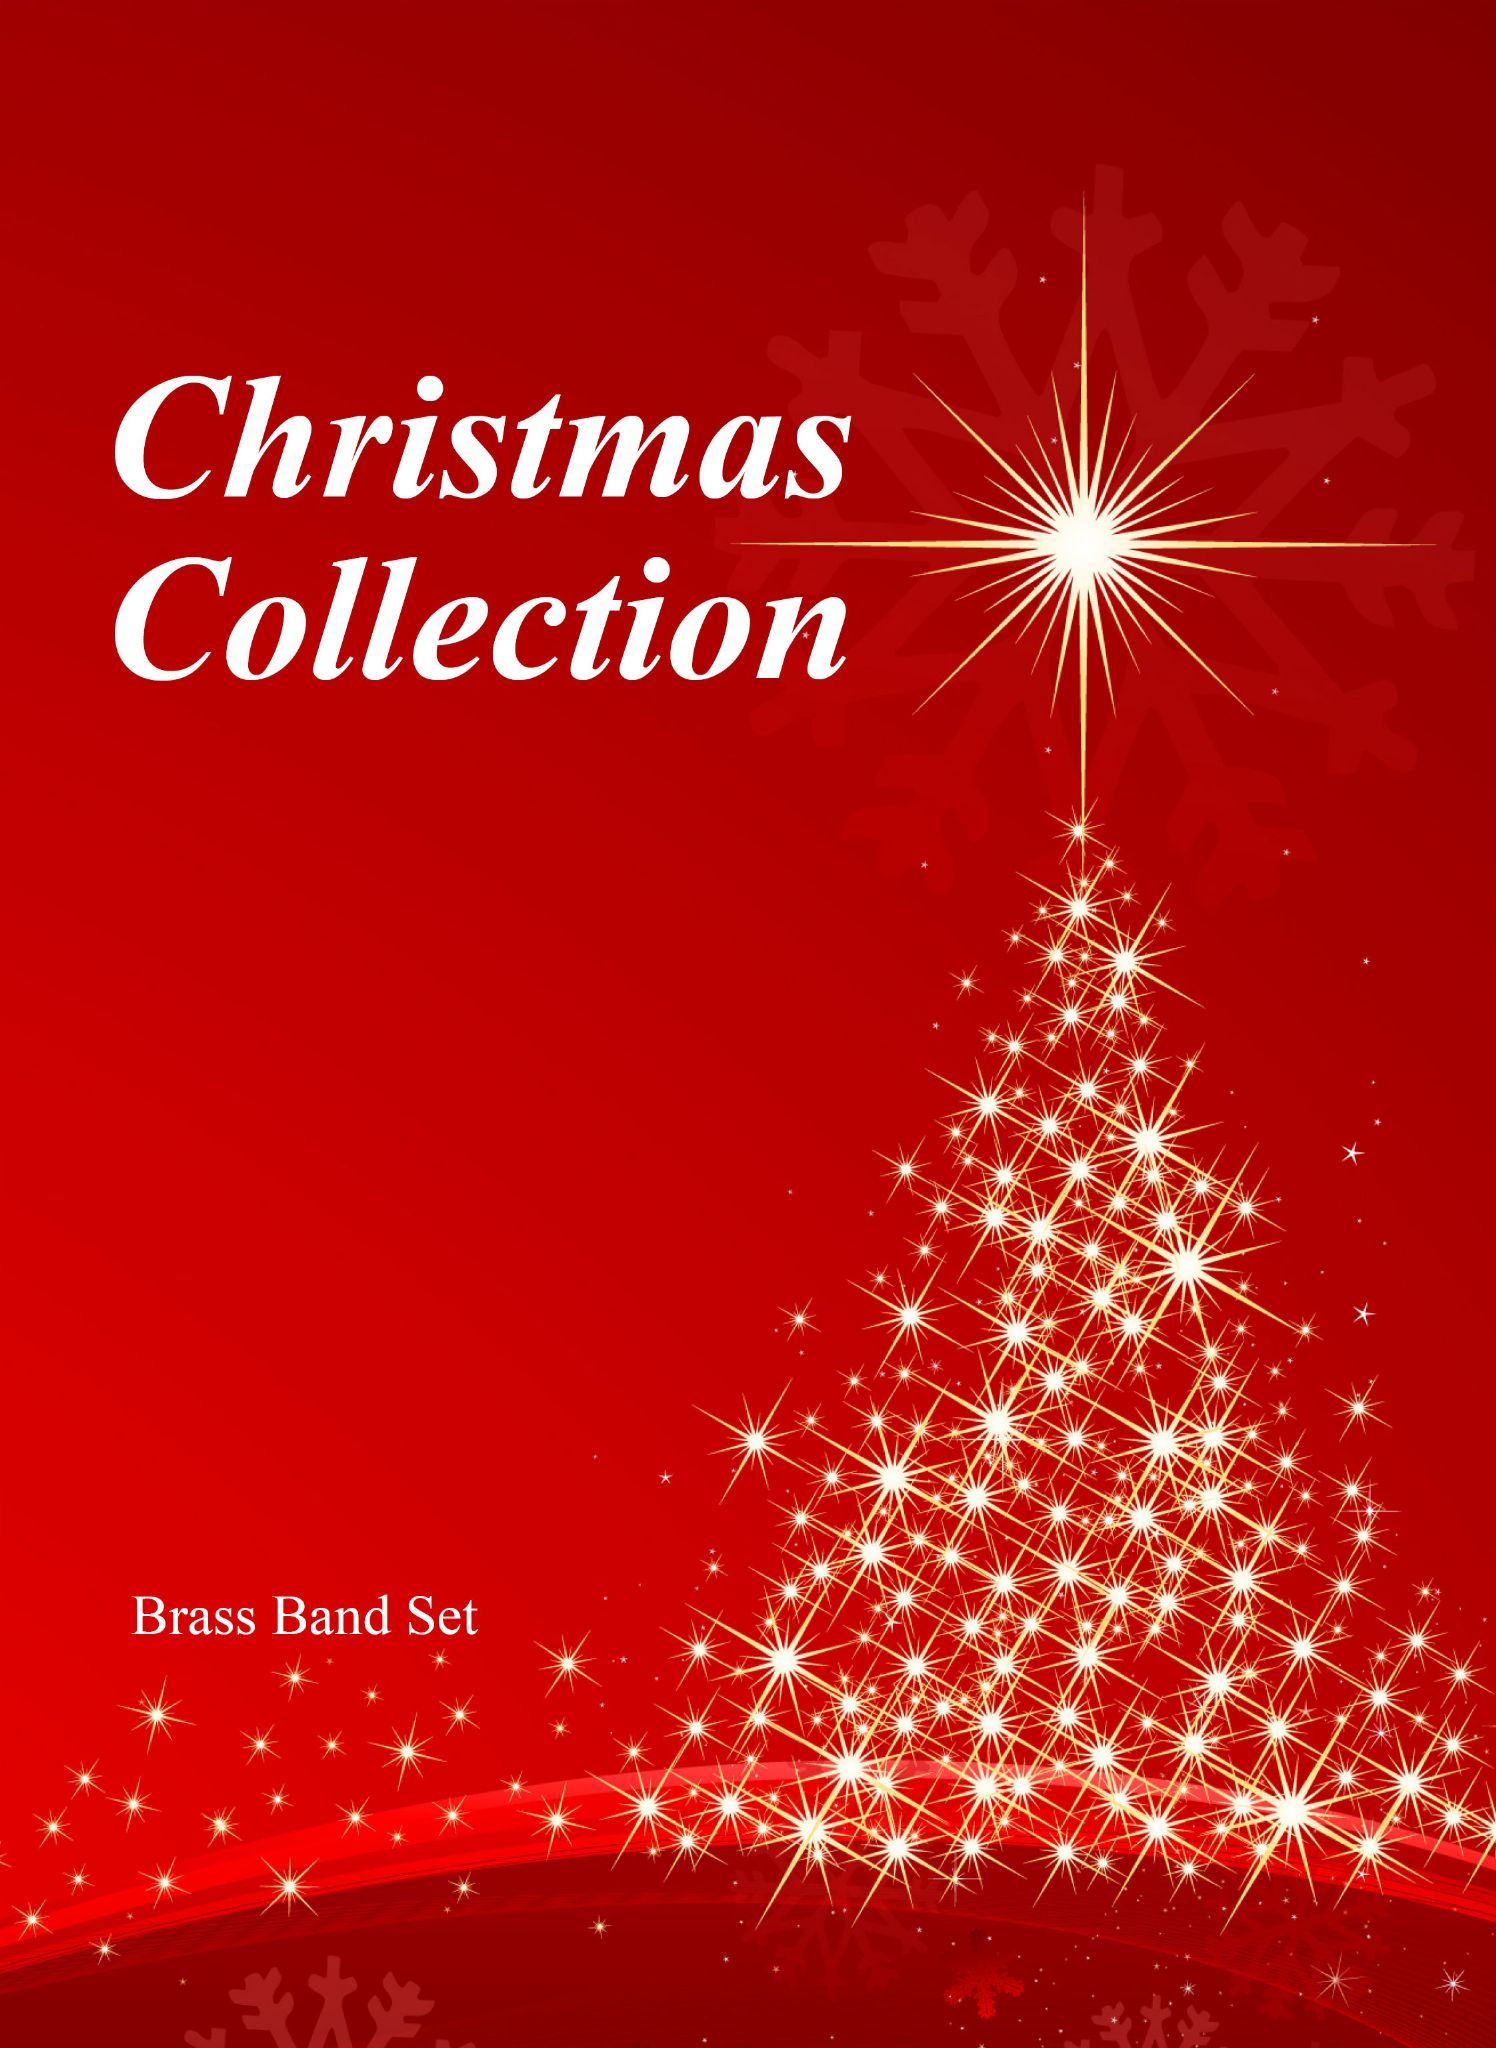 Christmas Collection - Brass Band Set - March Card Size